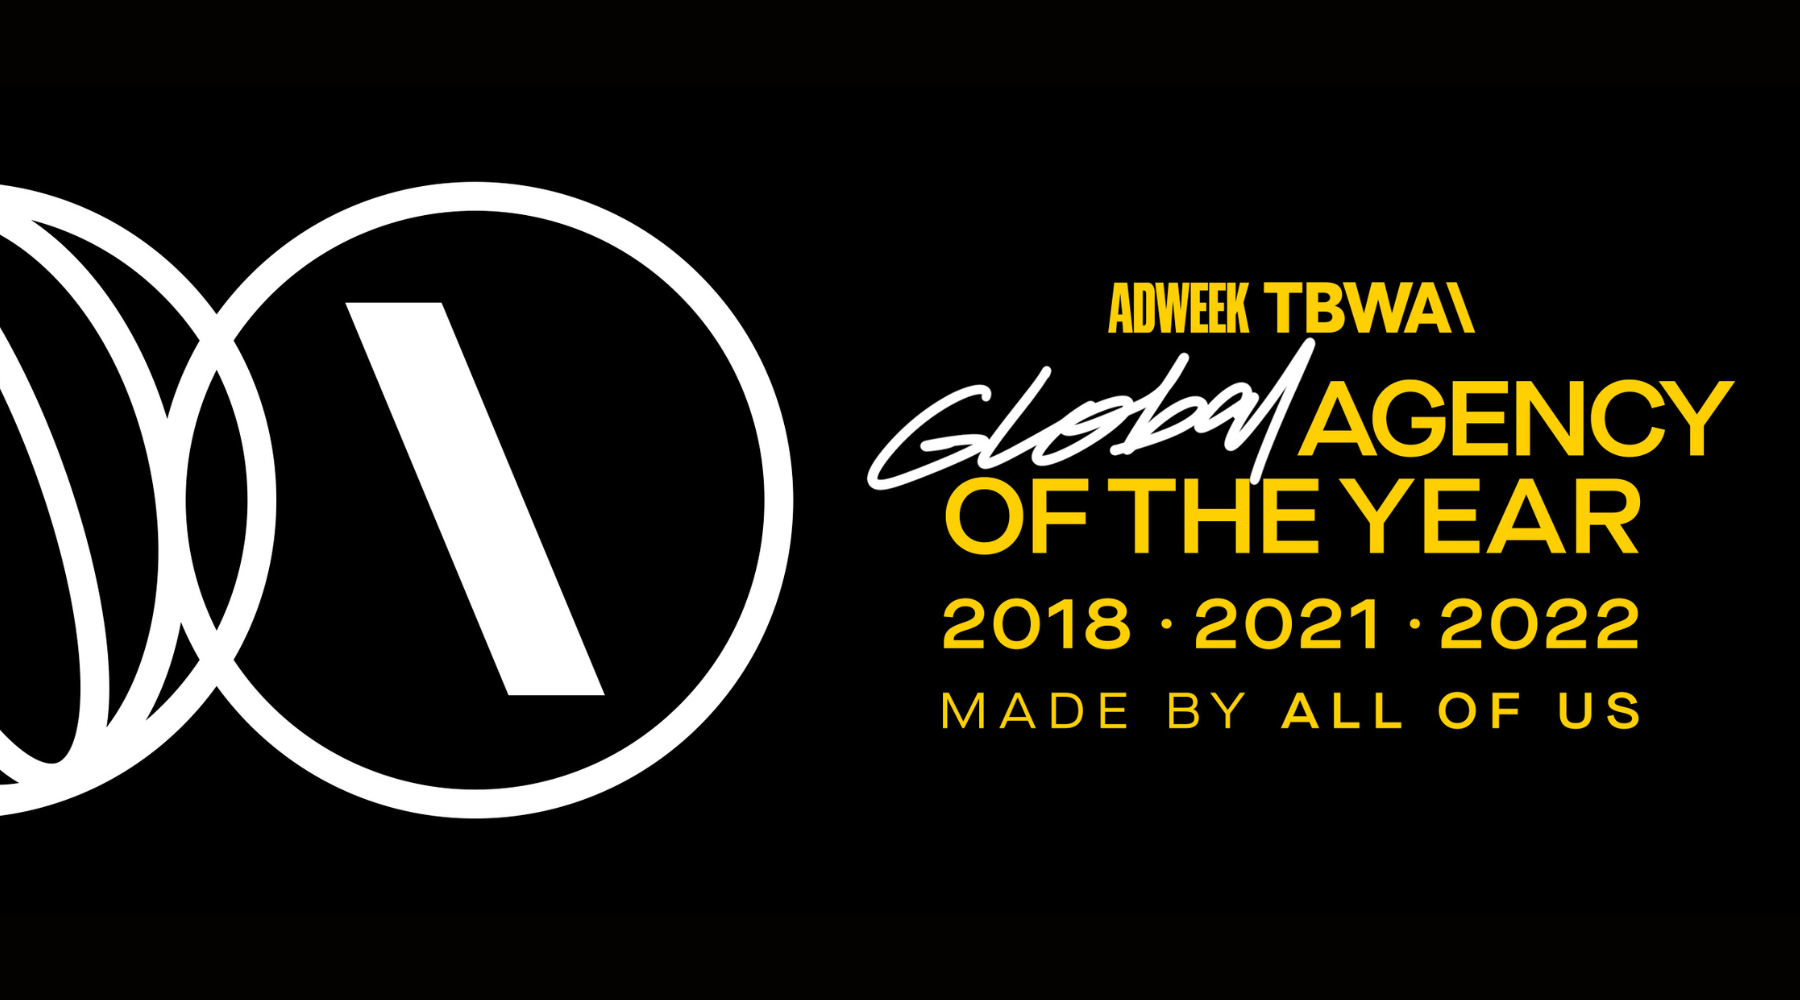 TBWA Recognized as Adweek's 2022 Global Agency of the Year for Second Year in a Row